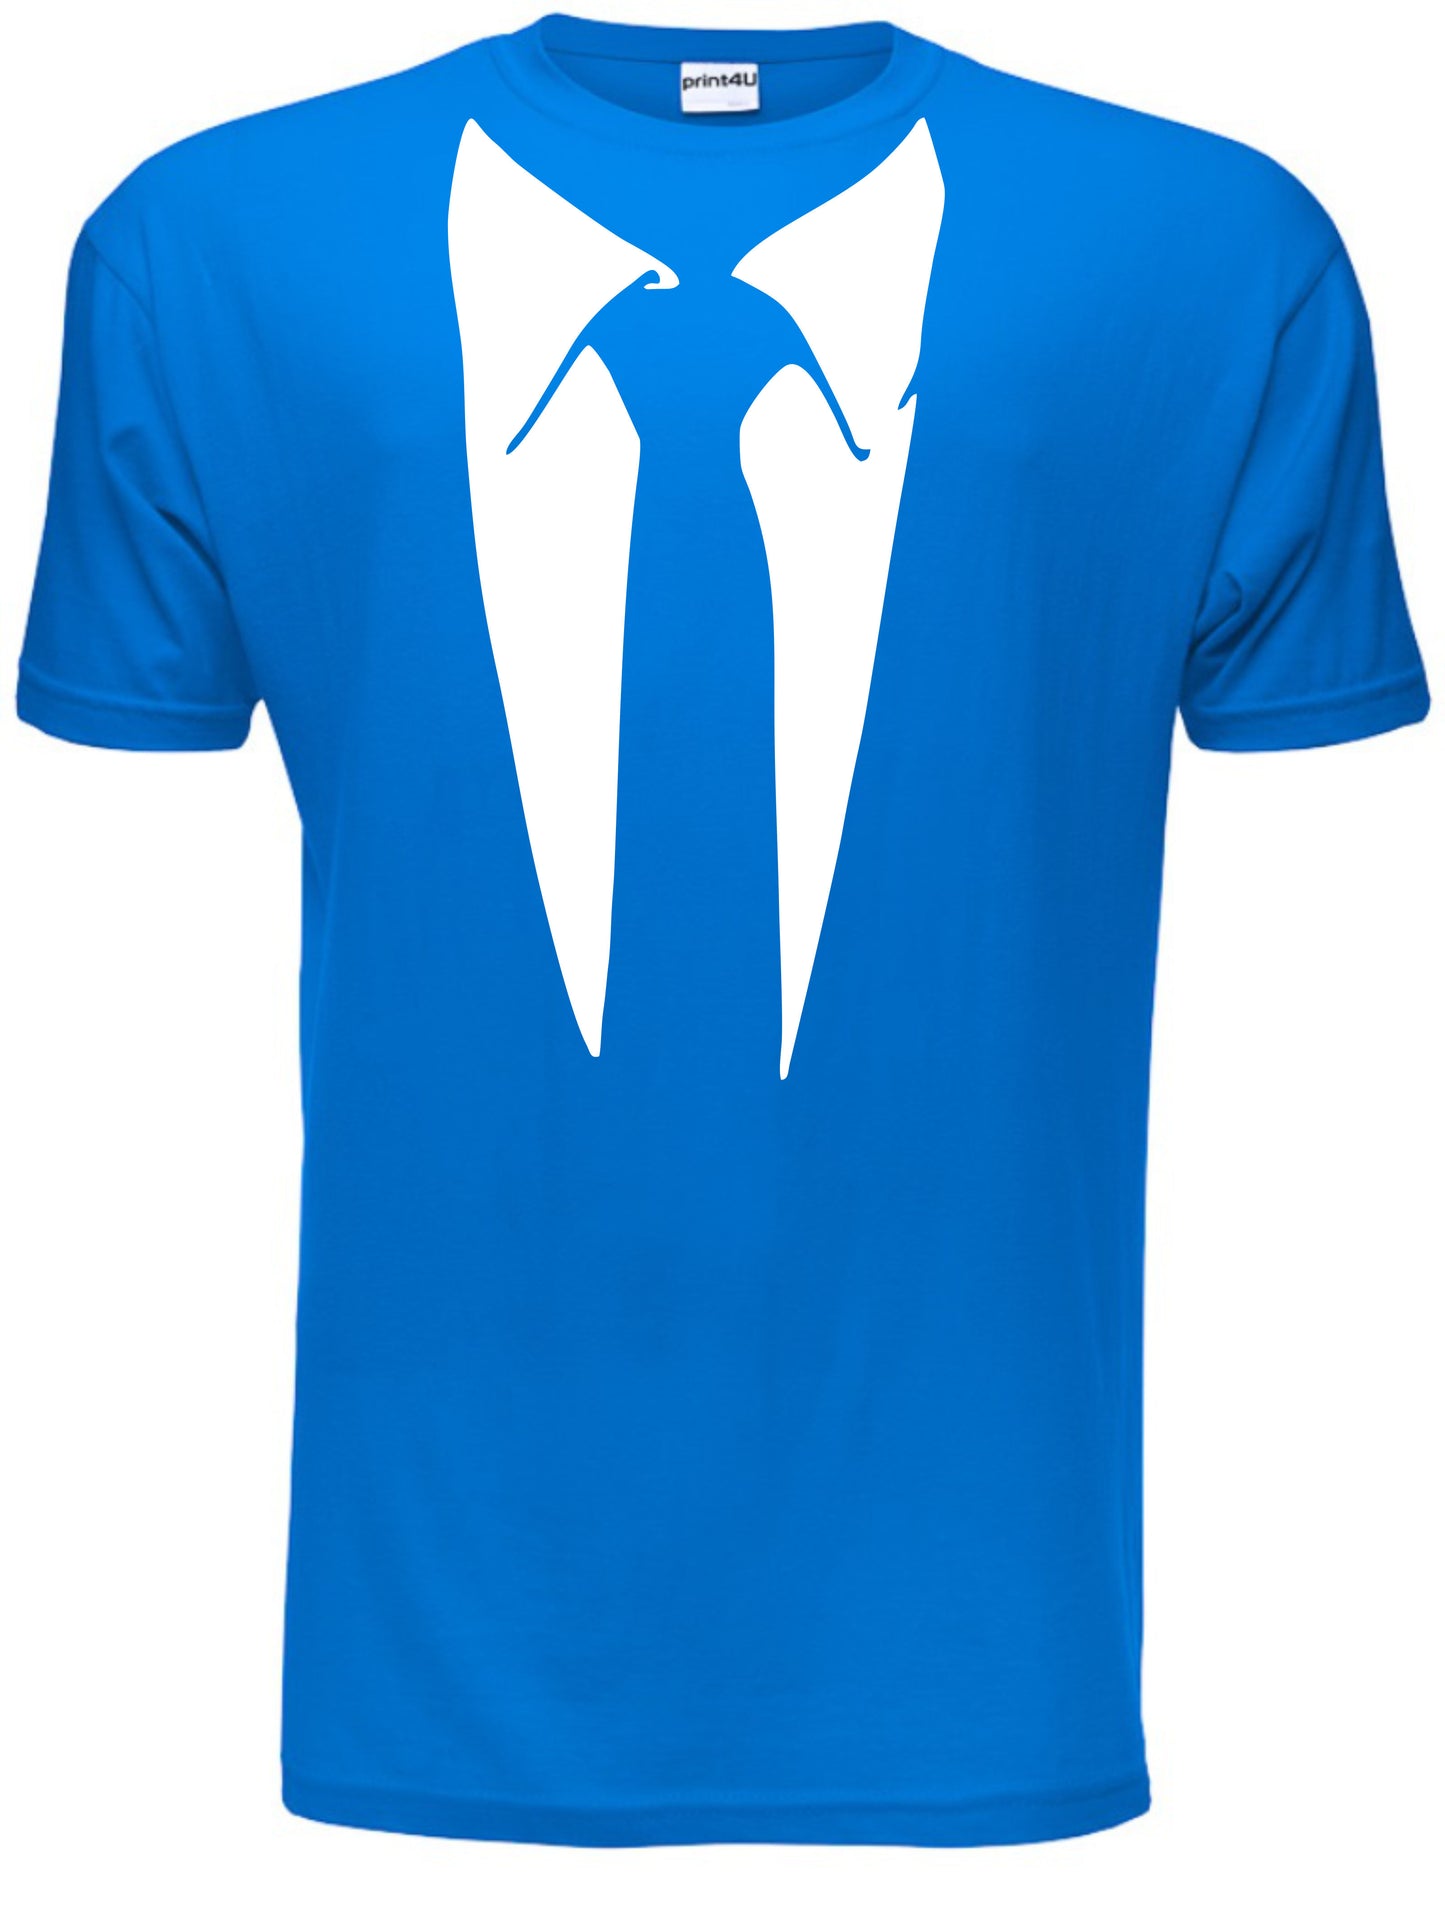 Tie With Collar Tuxedo Funny Gift Mens T-Shirt Size S-XXL